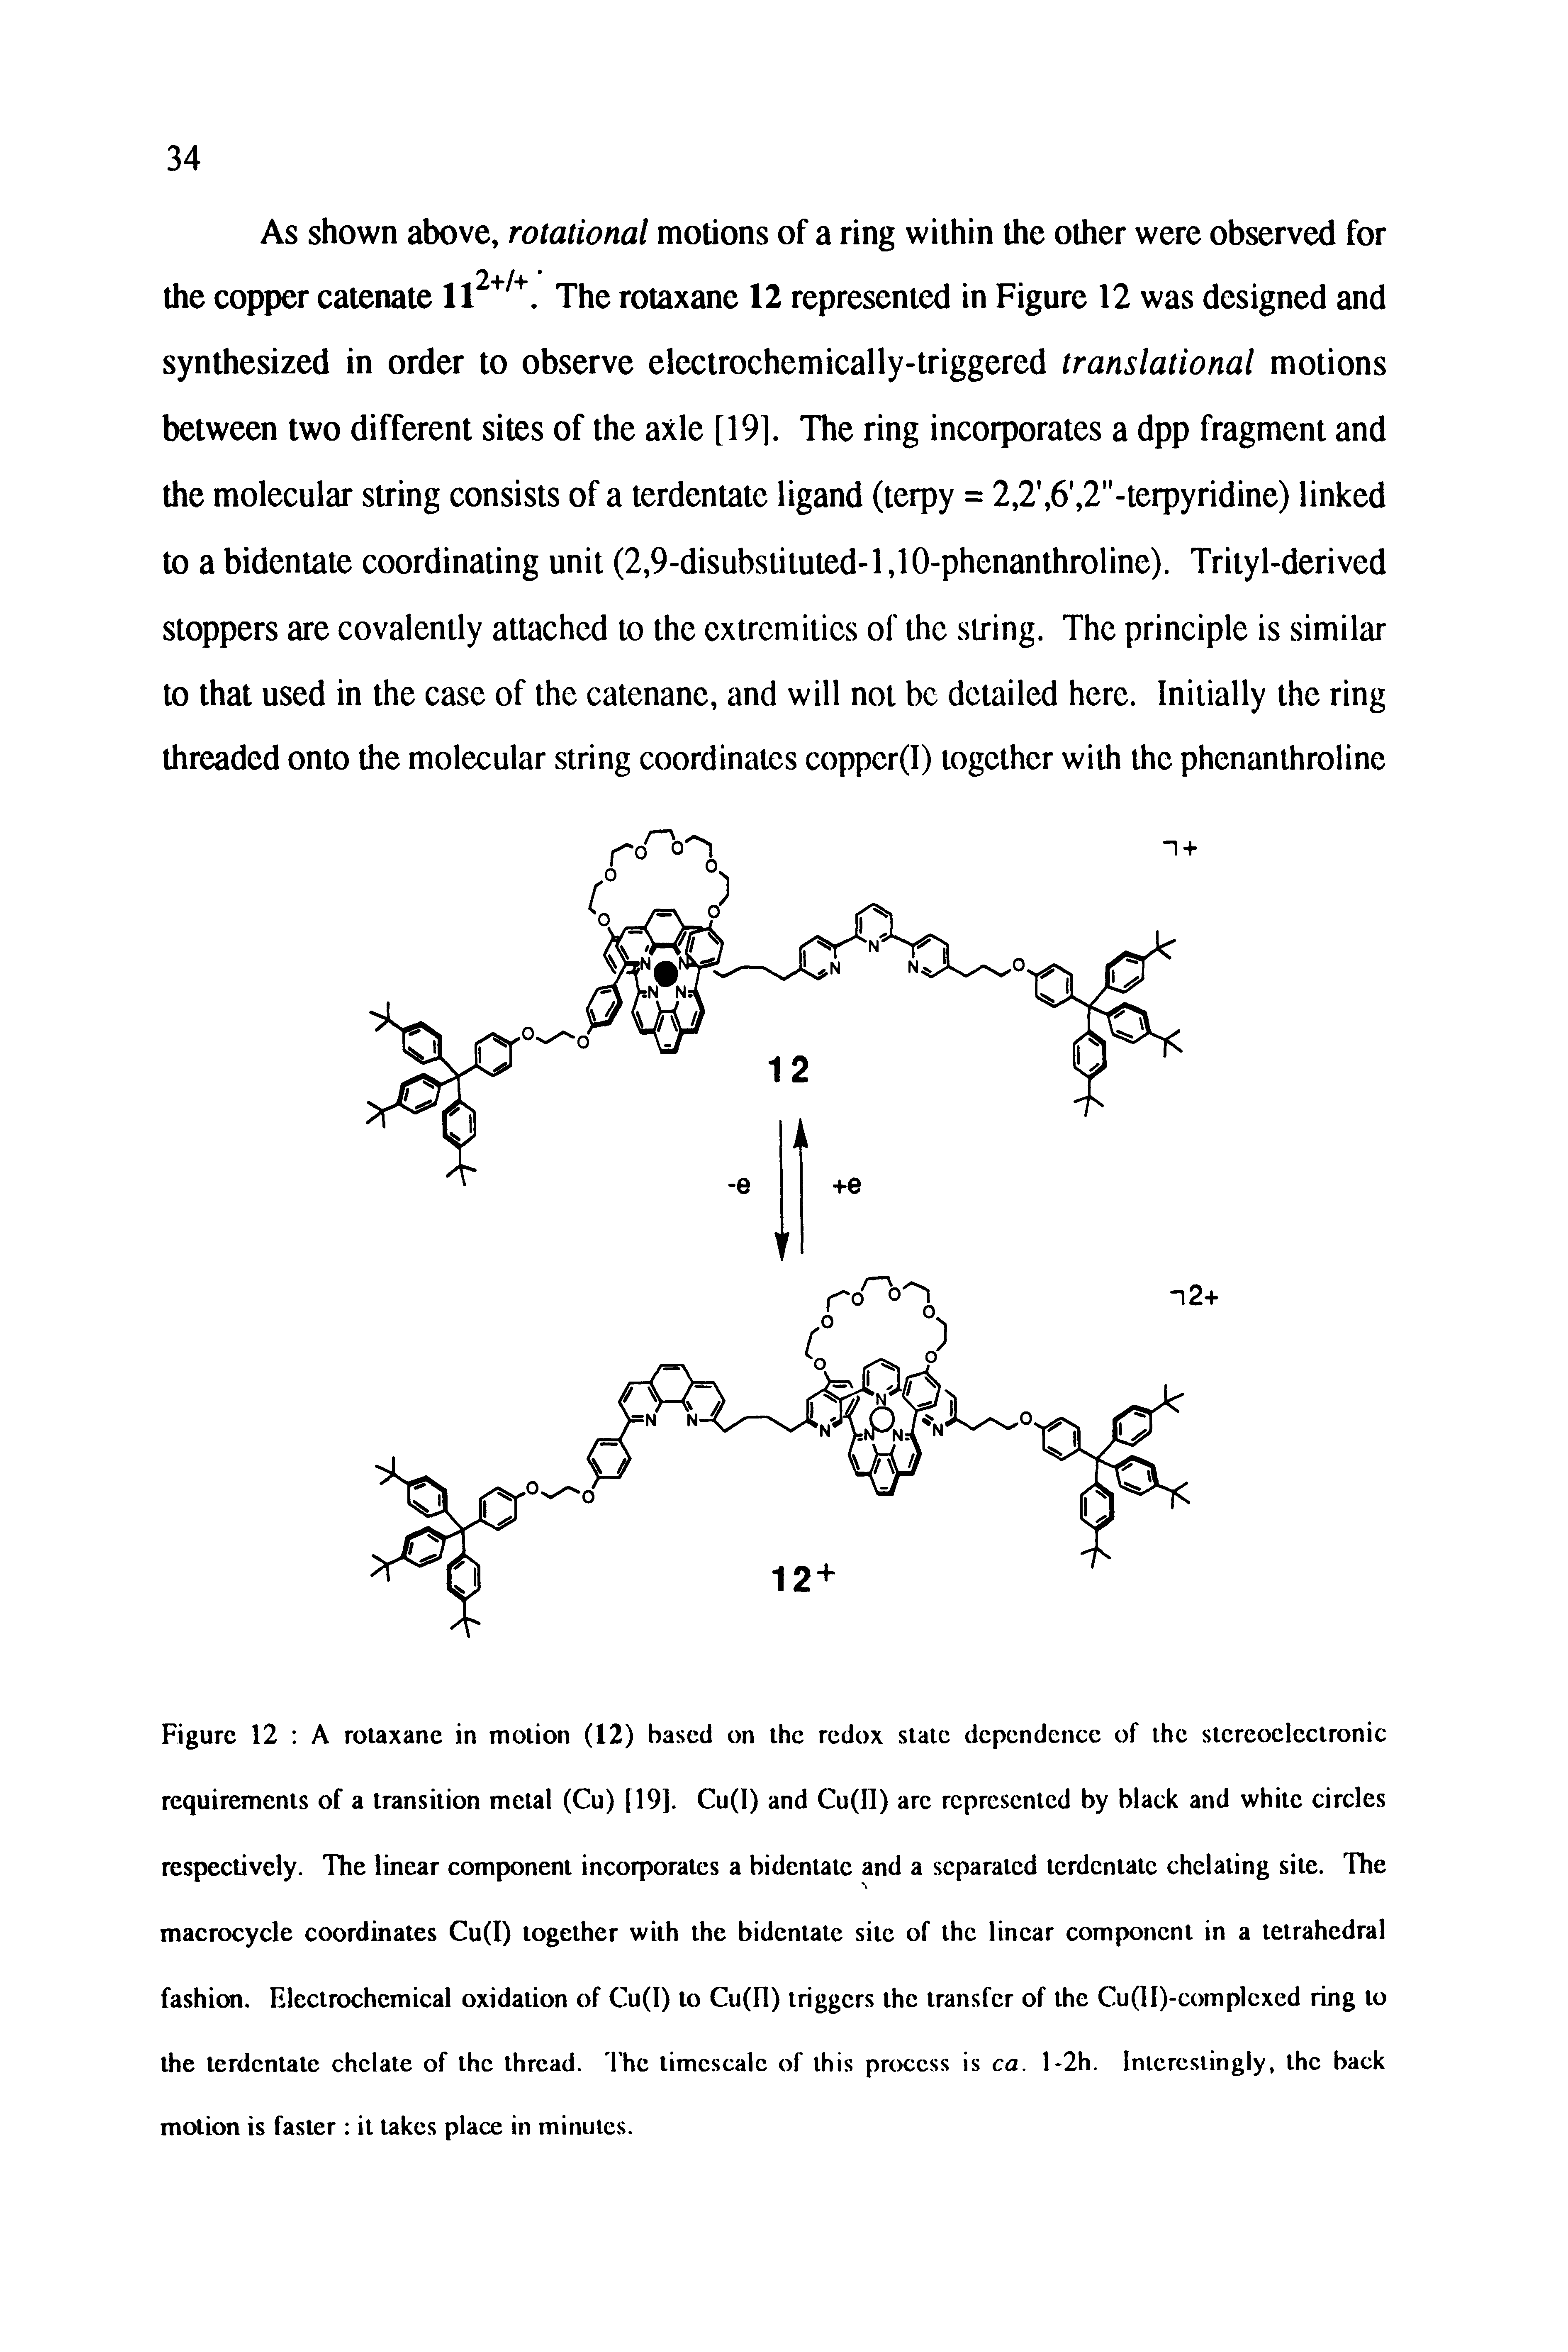 Figure 12 A rotaxane in motion (12) based on the redox state dependence of the stereoelectronic requirements of a transition metal (Cu) [19]. Cu(I) and Cu(ll) arc represented by black and white circles respectively. The linear component incorporates a bidentate and a separated terdentate chelating site. The macrocycle coordinates Cu(I) together with the bidentate site of the linear component in a tetrahedral fashion. Electrochemical oxidation of Cu(I) to Cuffl) triggers the transfer of the Cu(lI)-complcxed ring to the terdentate chelate of the thread. I hc timescale of this process is ca. l-2h. Interestingly, the back motion is faster it takes place in minutes.